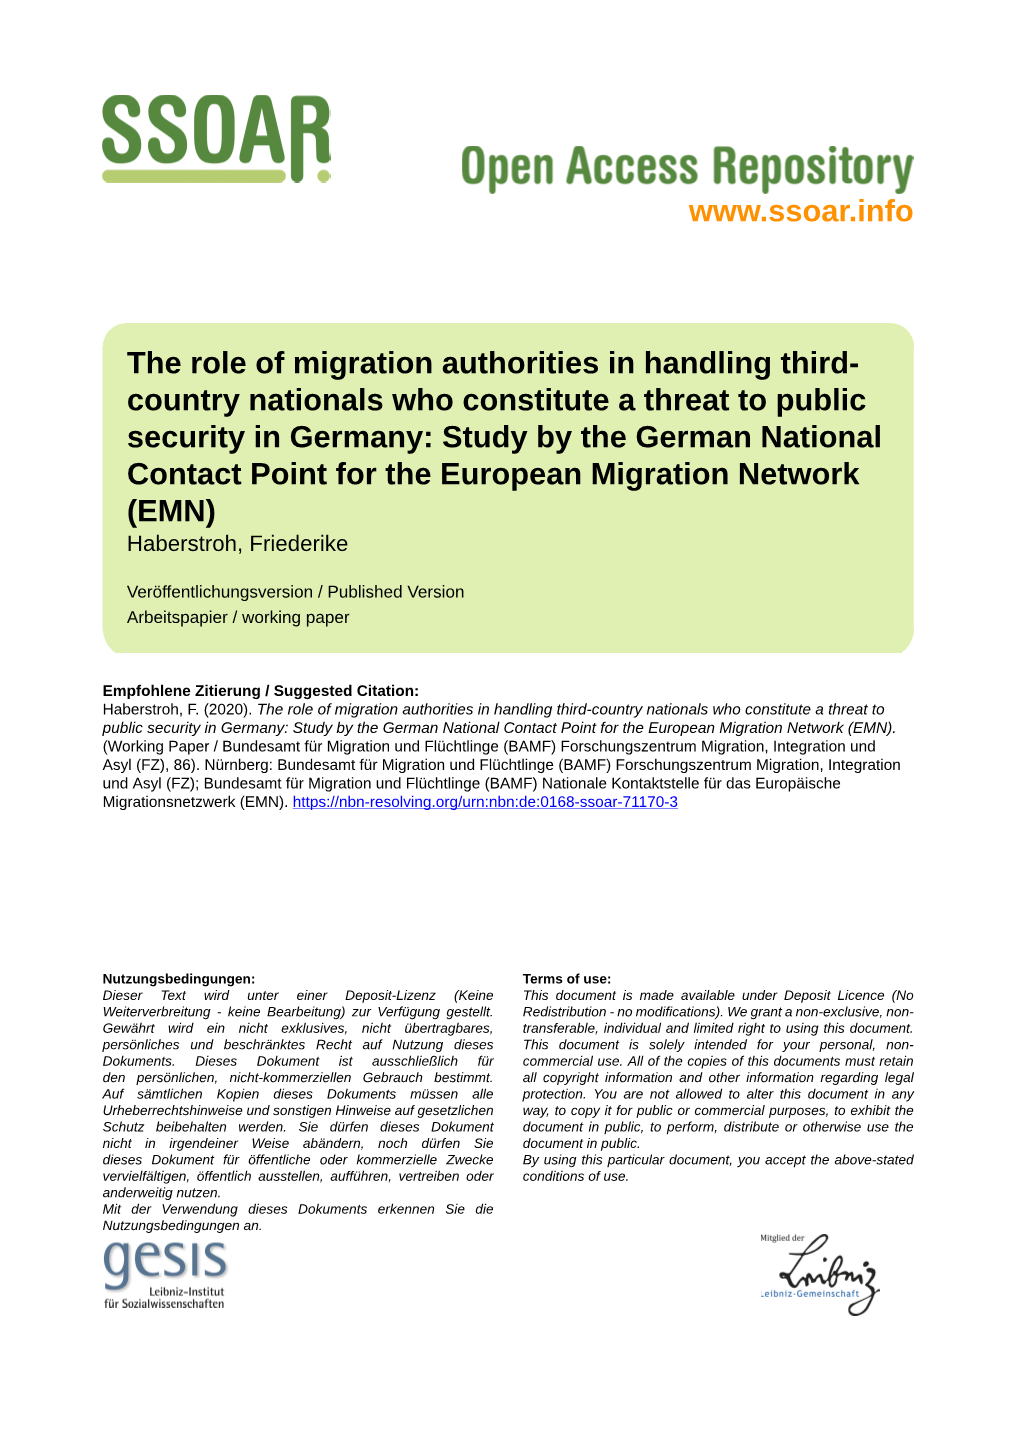 The Role of Migration Authorities in Handling Third-Country Nationals Who Constitute a Threat to Public Security in Germany